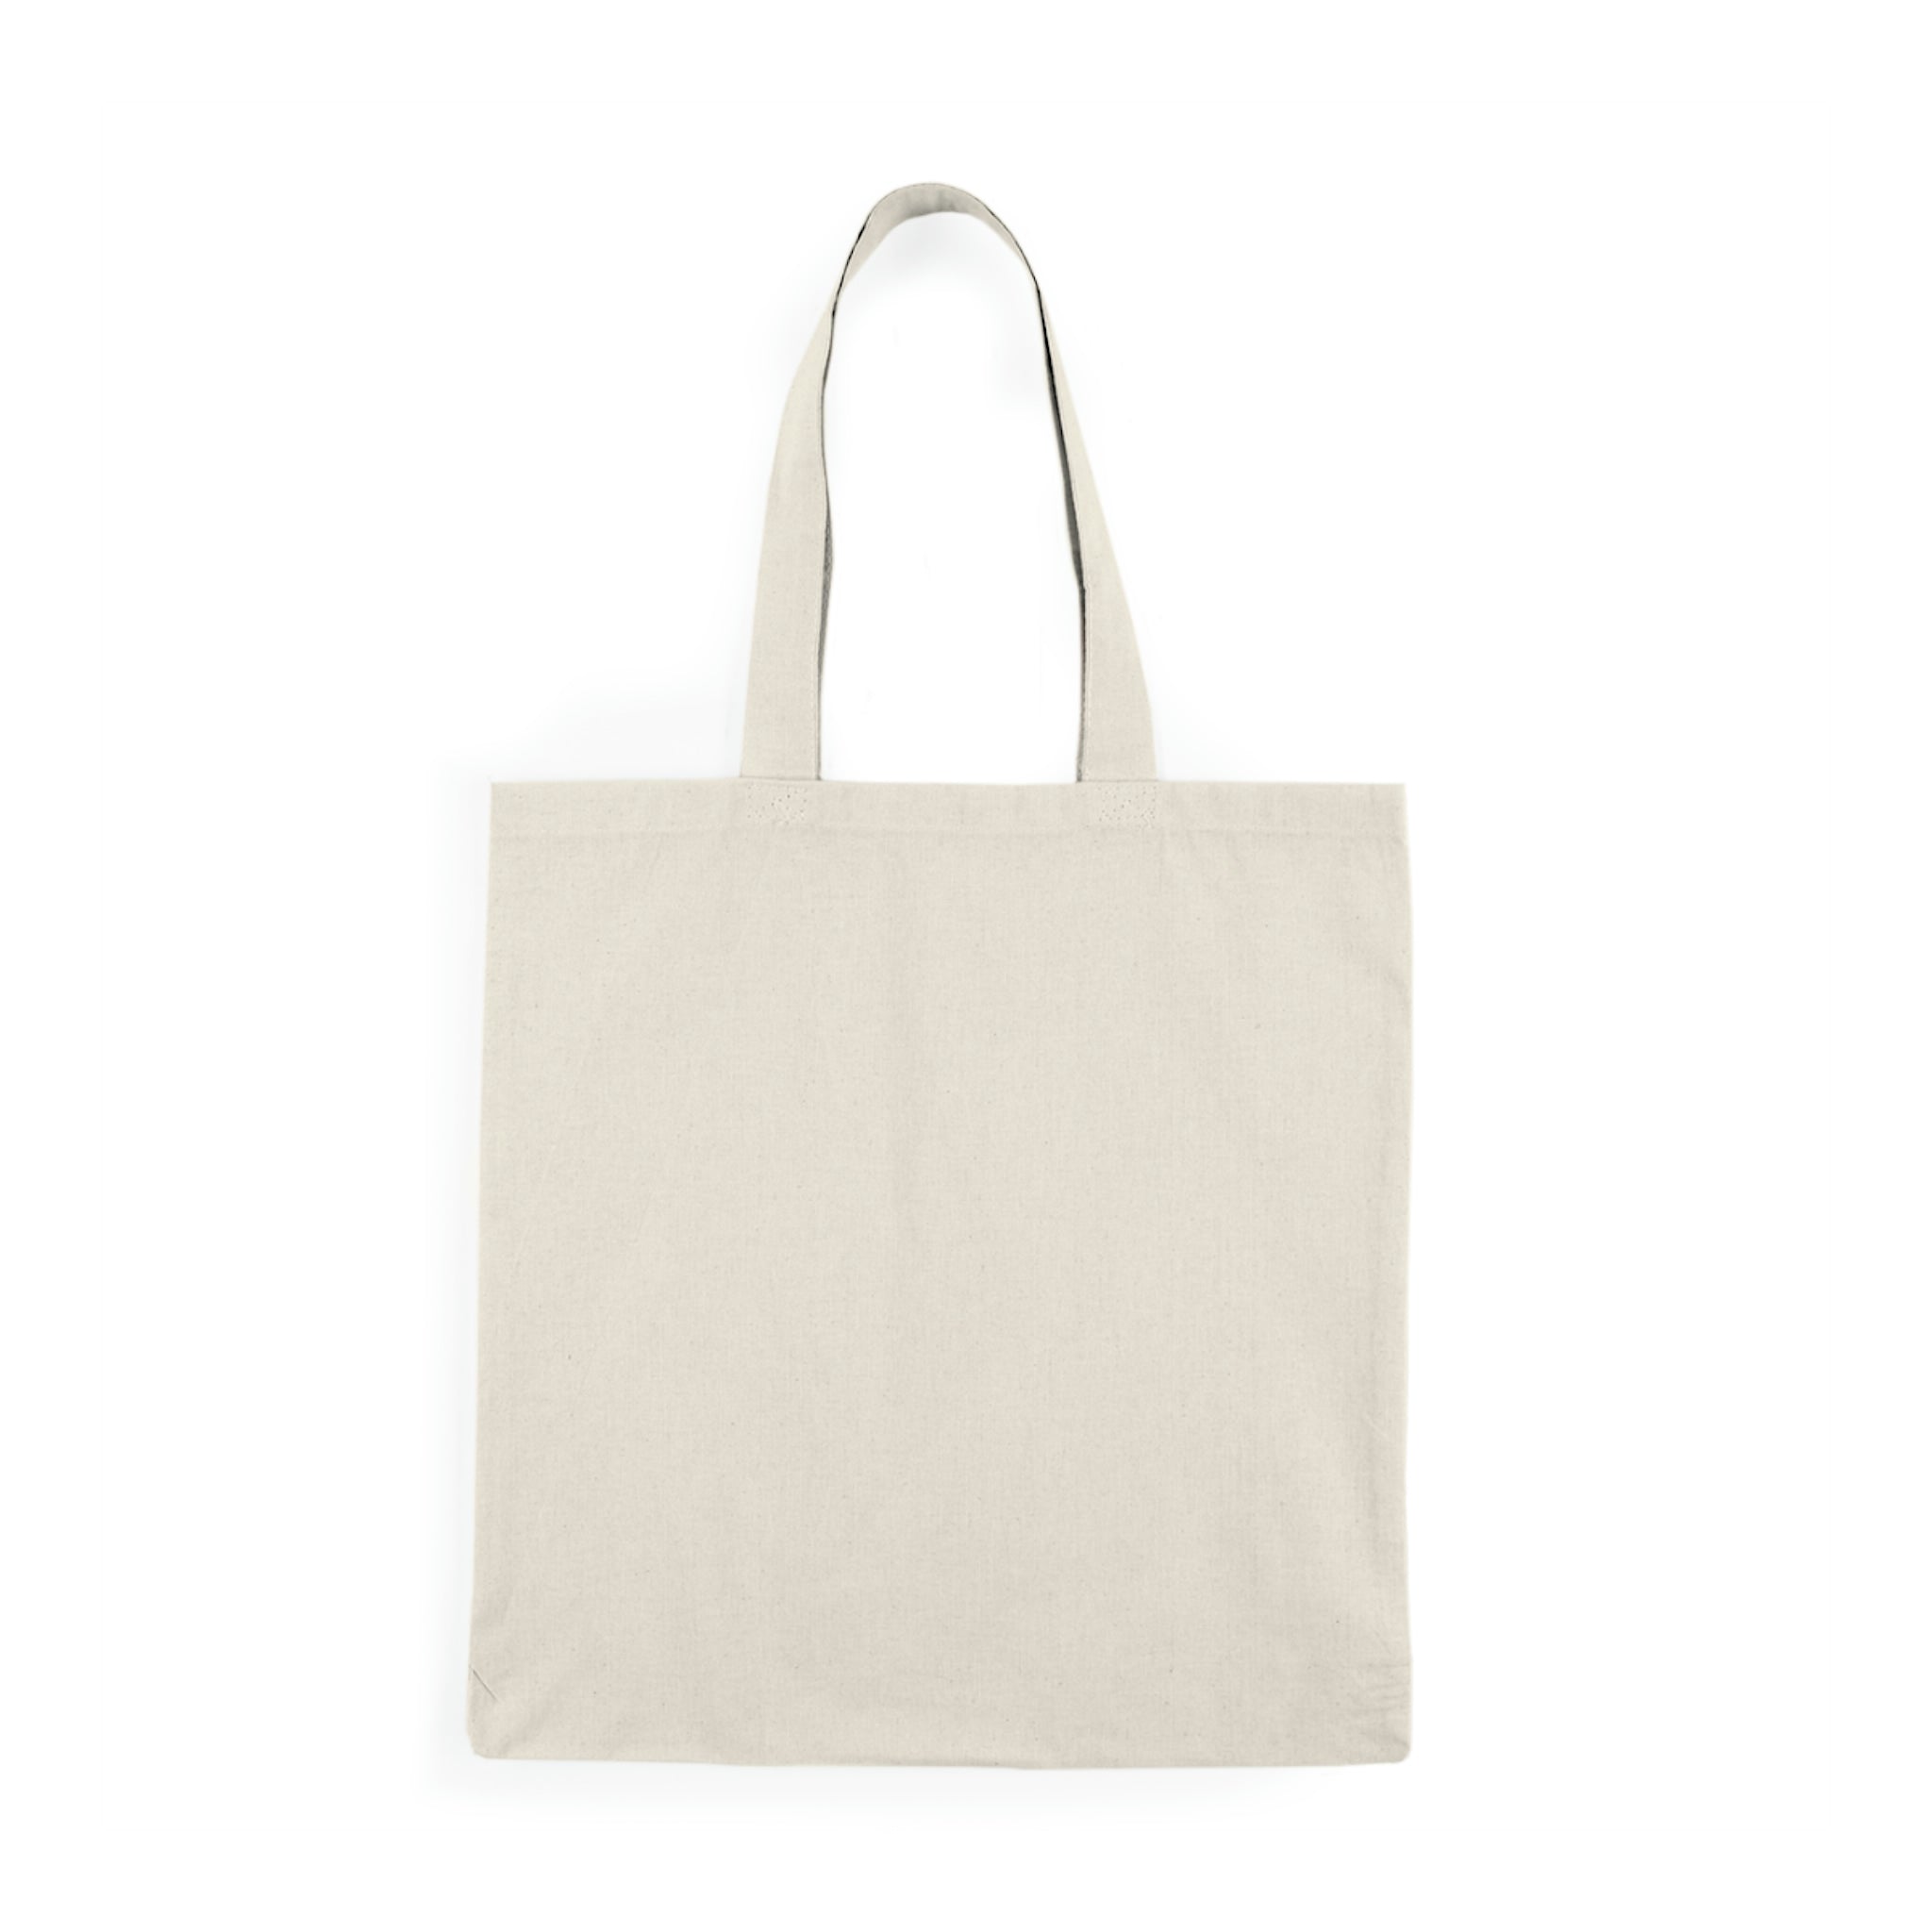 curves tote